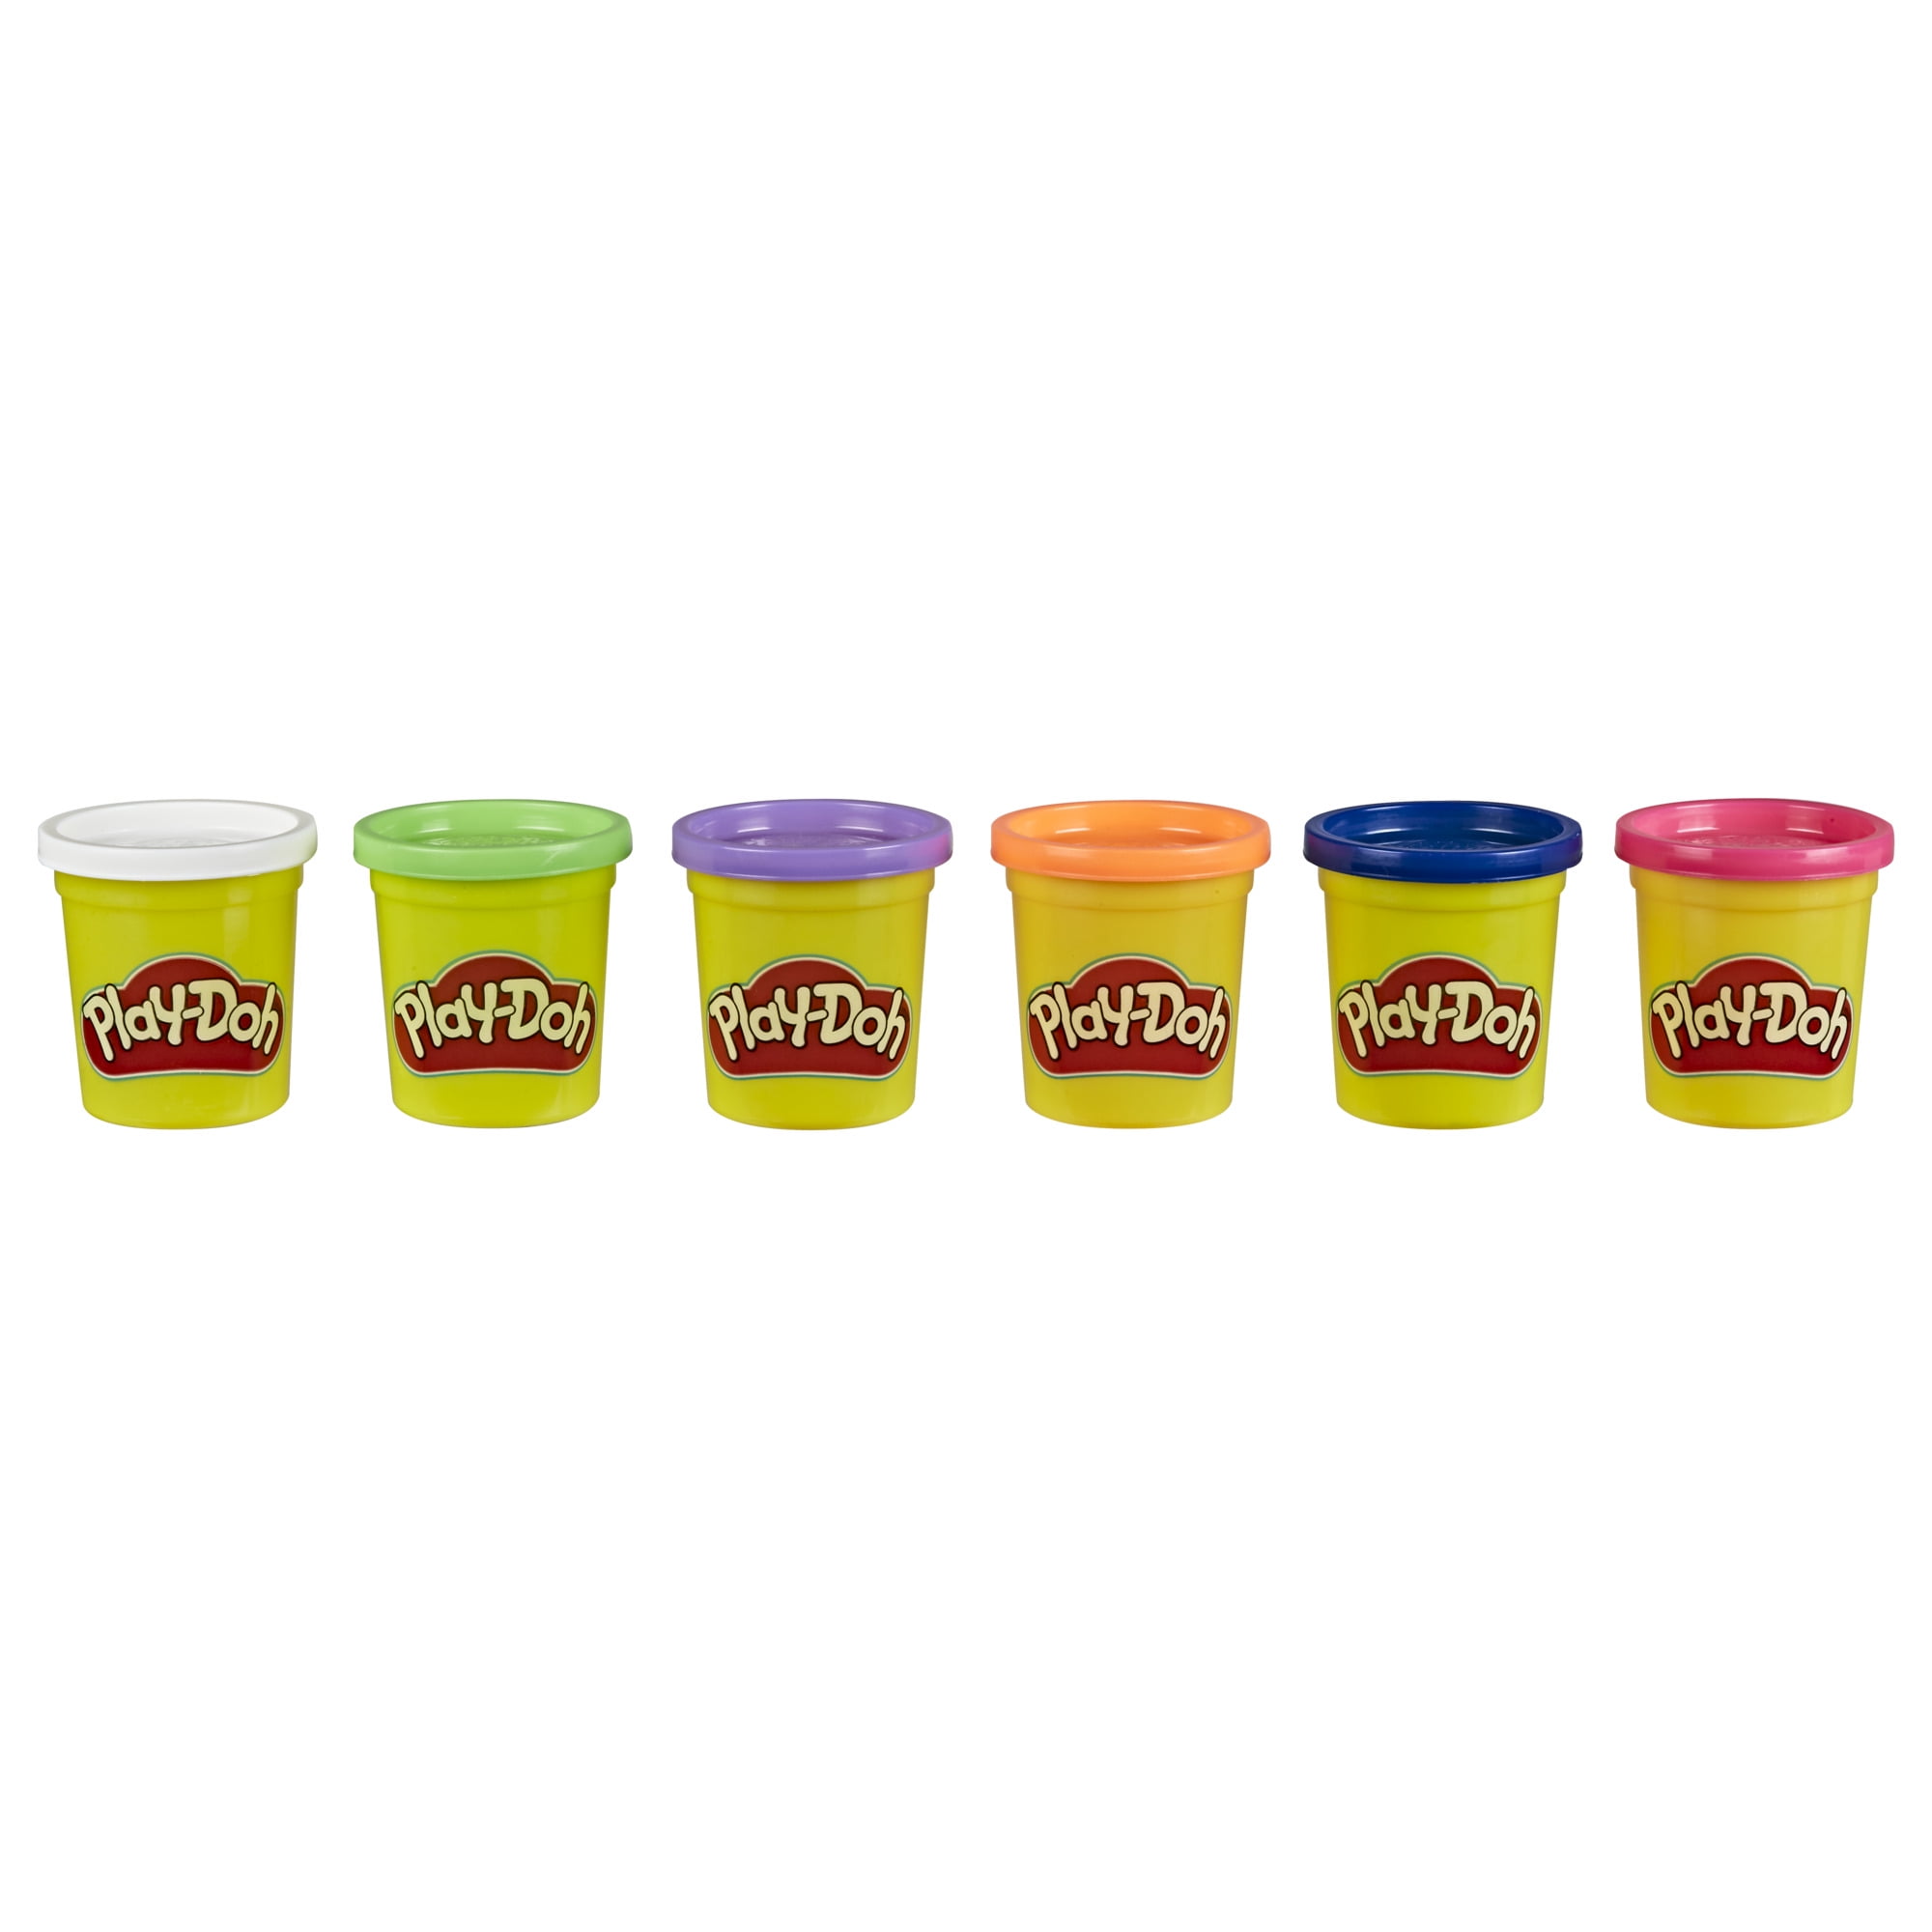  Play-Doh Bulk Pack of 48 Cans, 6 Sets of 8 Modeling Compound  Colors, Perfect for Halloween Treat Bags, Party Favors, Arts & Crafts, 3oz,  Preschool Toys 2+ ( Exclusive) : Toys & Games